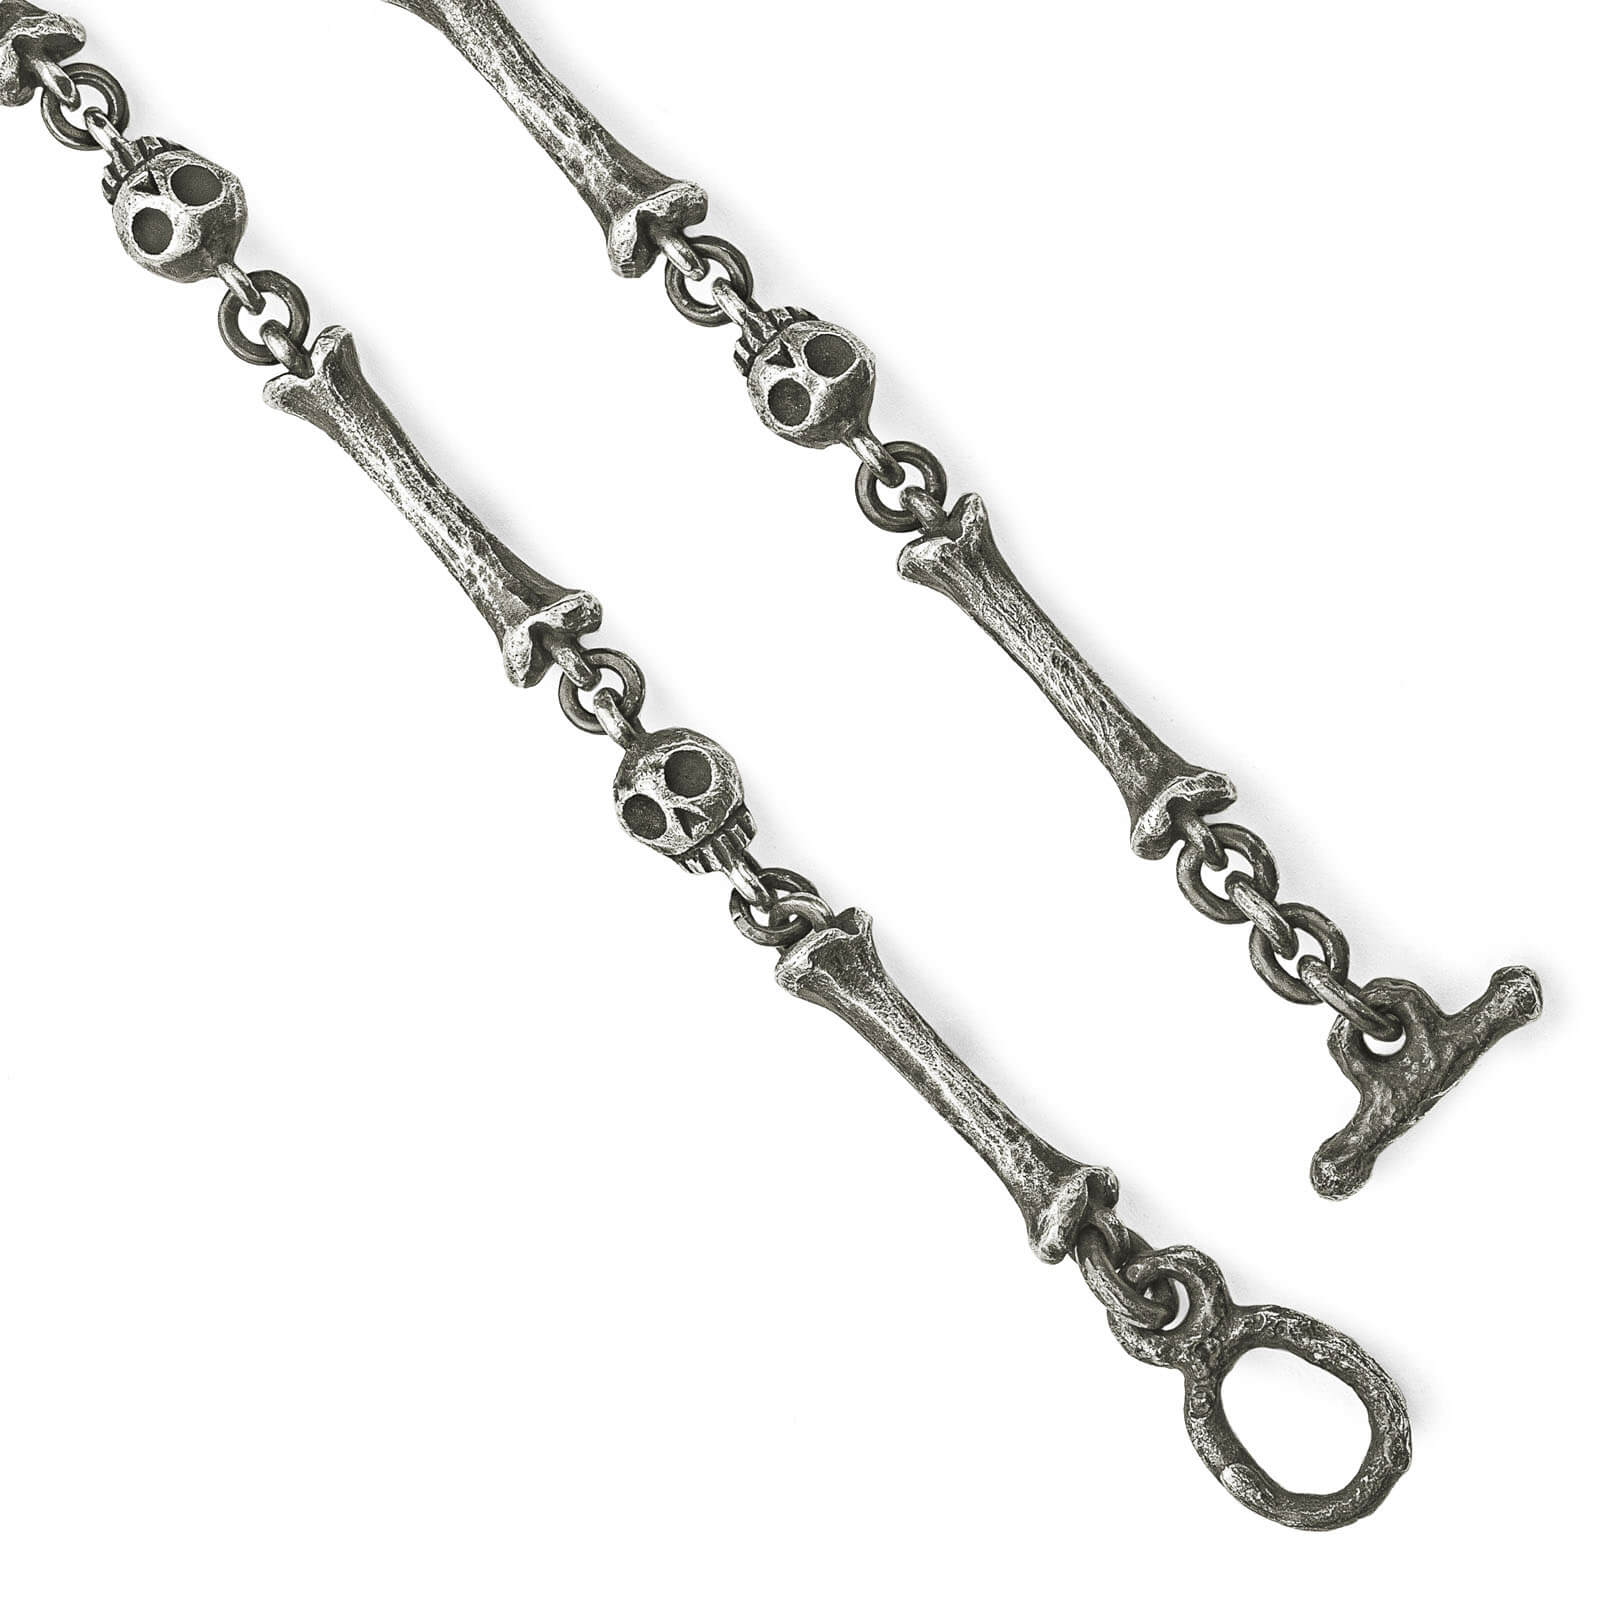 Antiqued Jumbo Pirate Link Chain Necklace